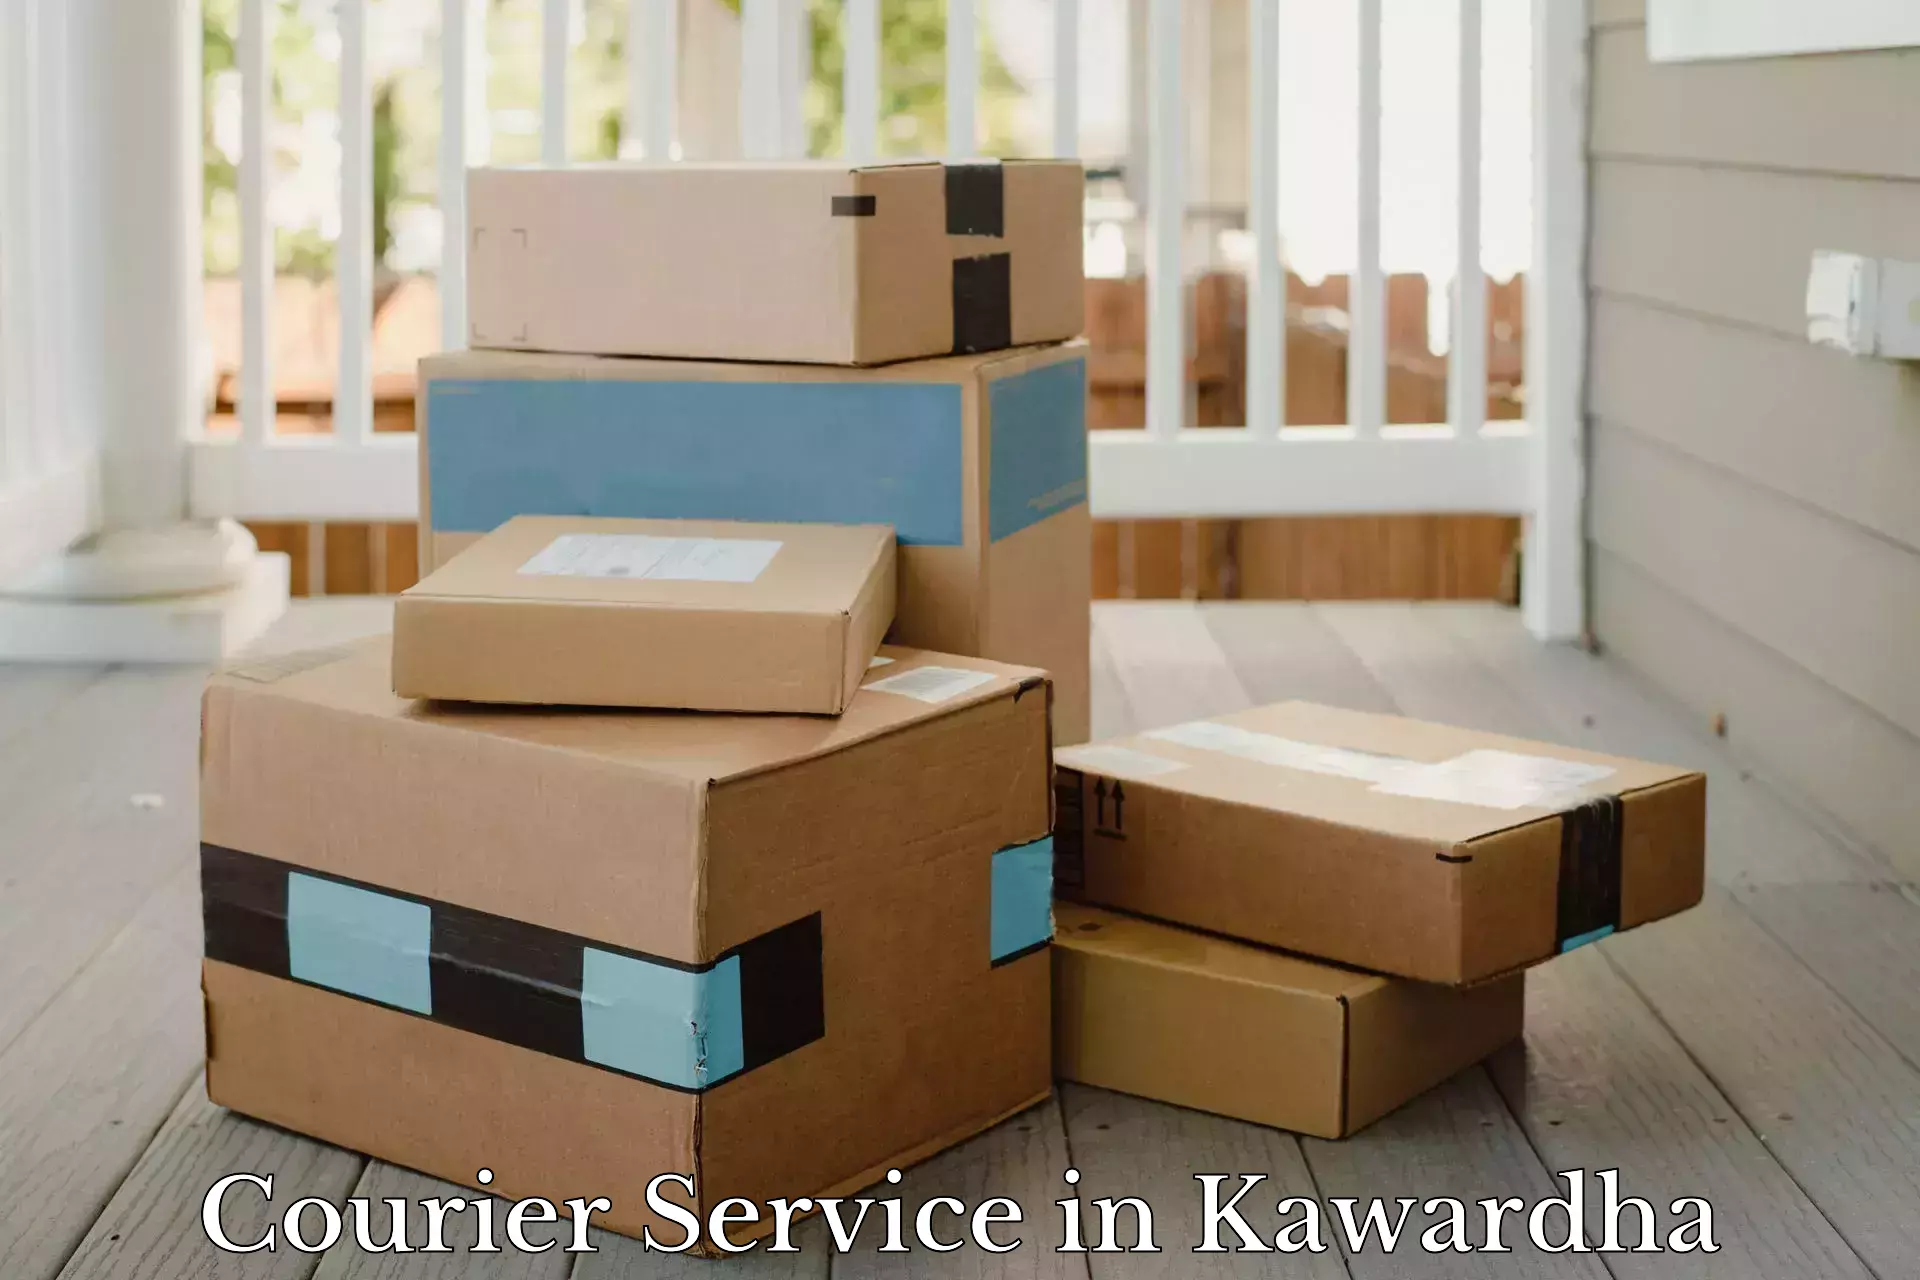 Cost-effective shipping solutions in Kawardha